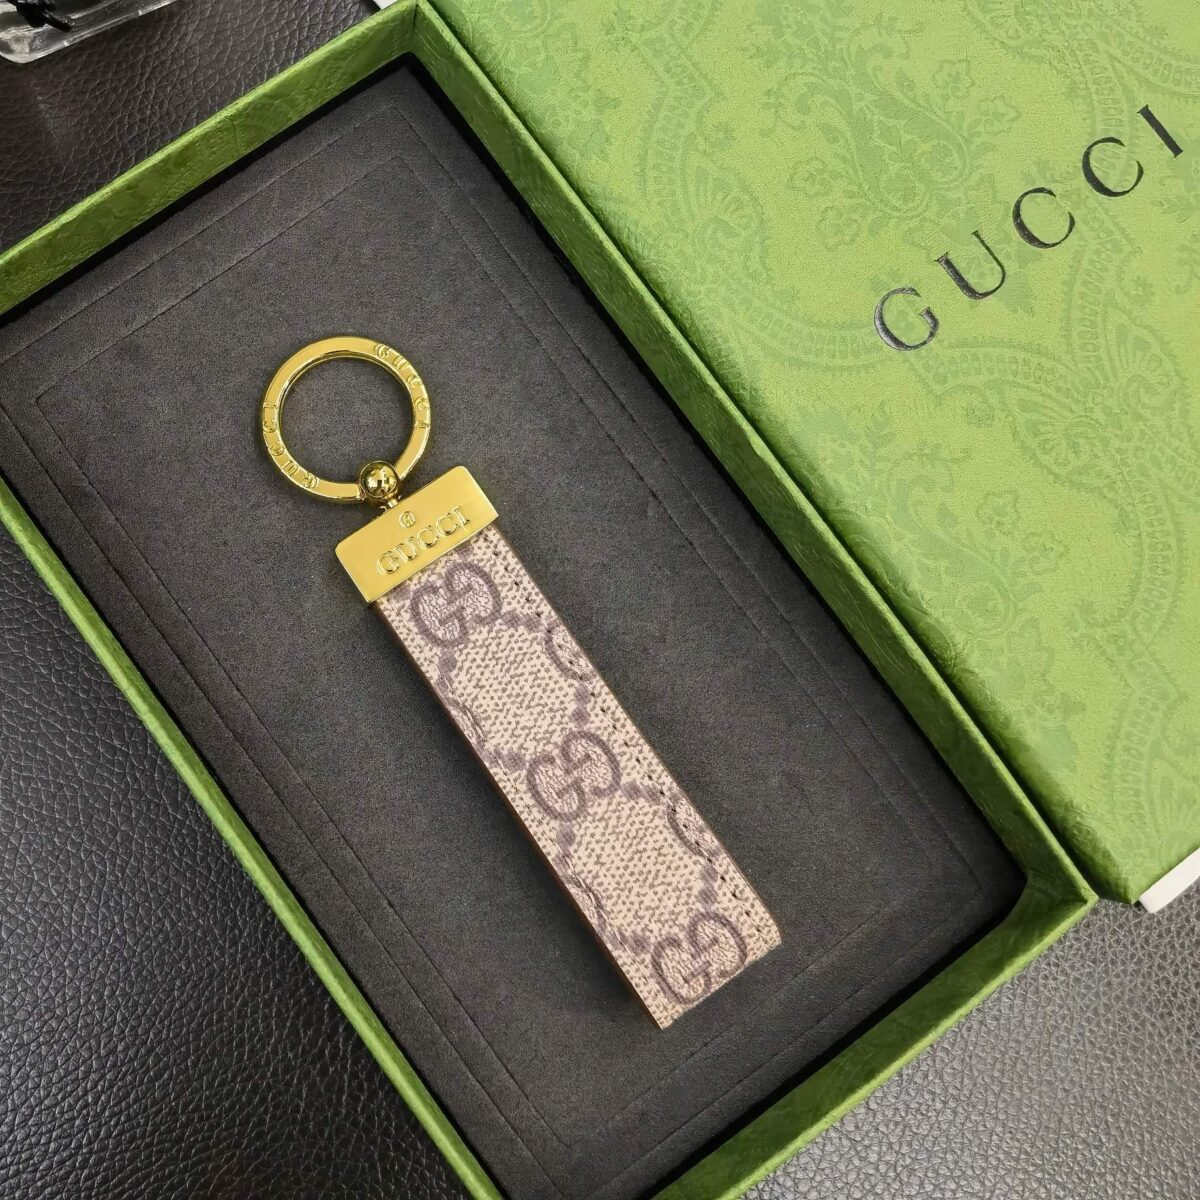 Gucci key chains: A glamorous collection of luxurious and stylish key accessories